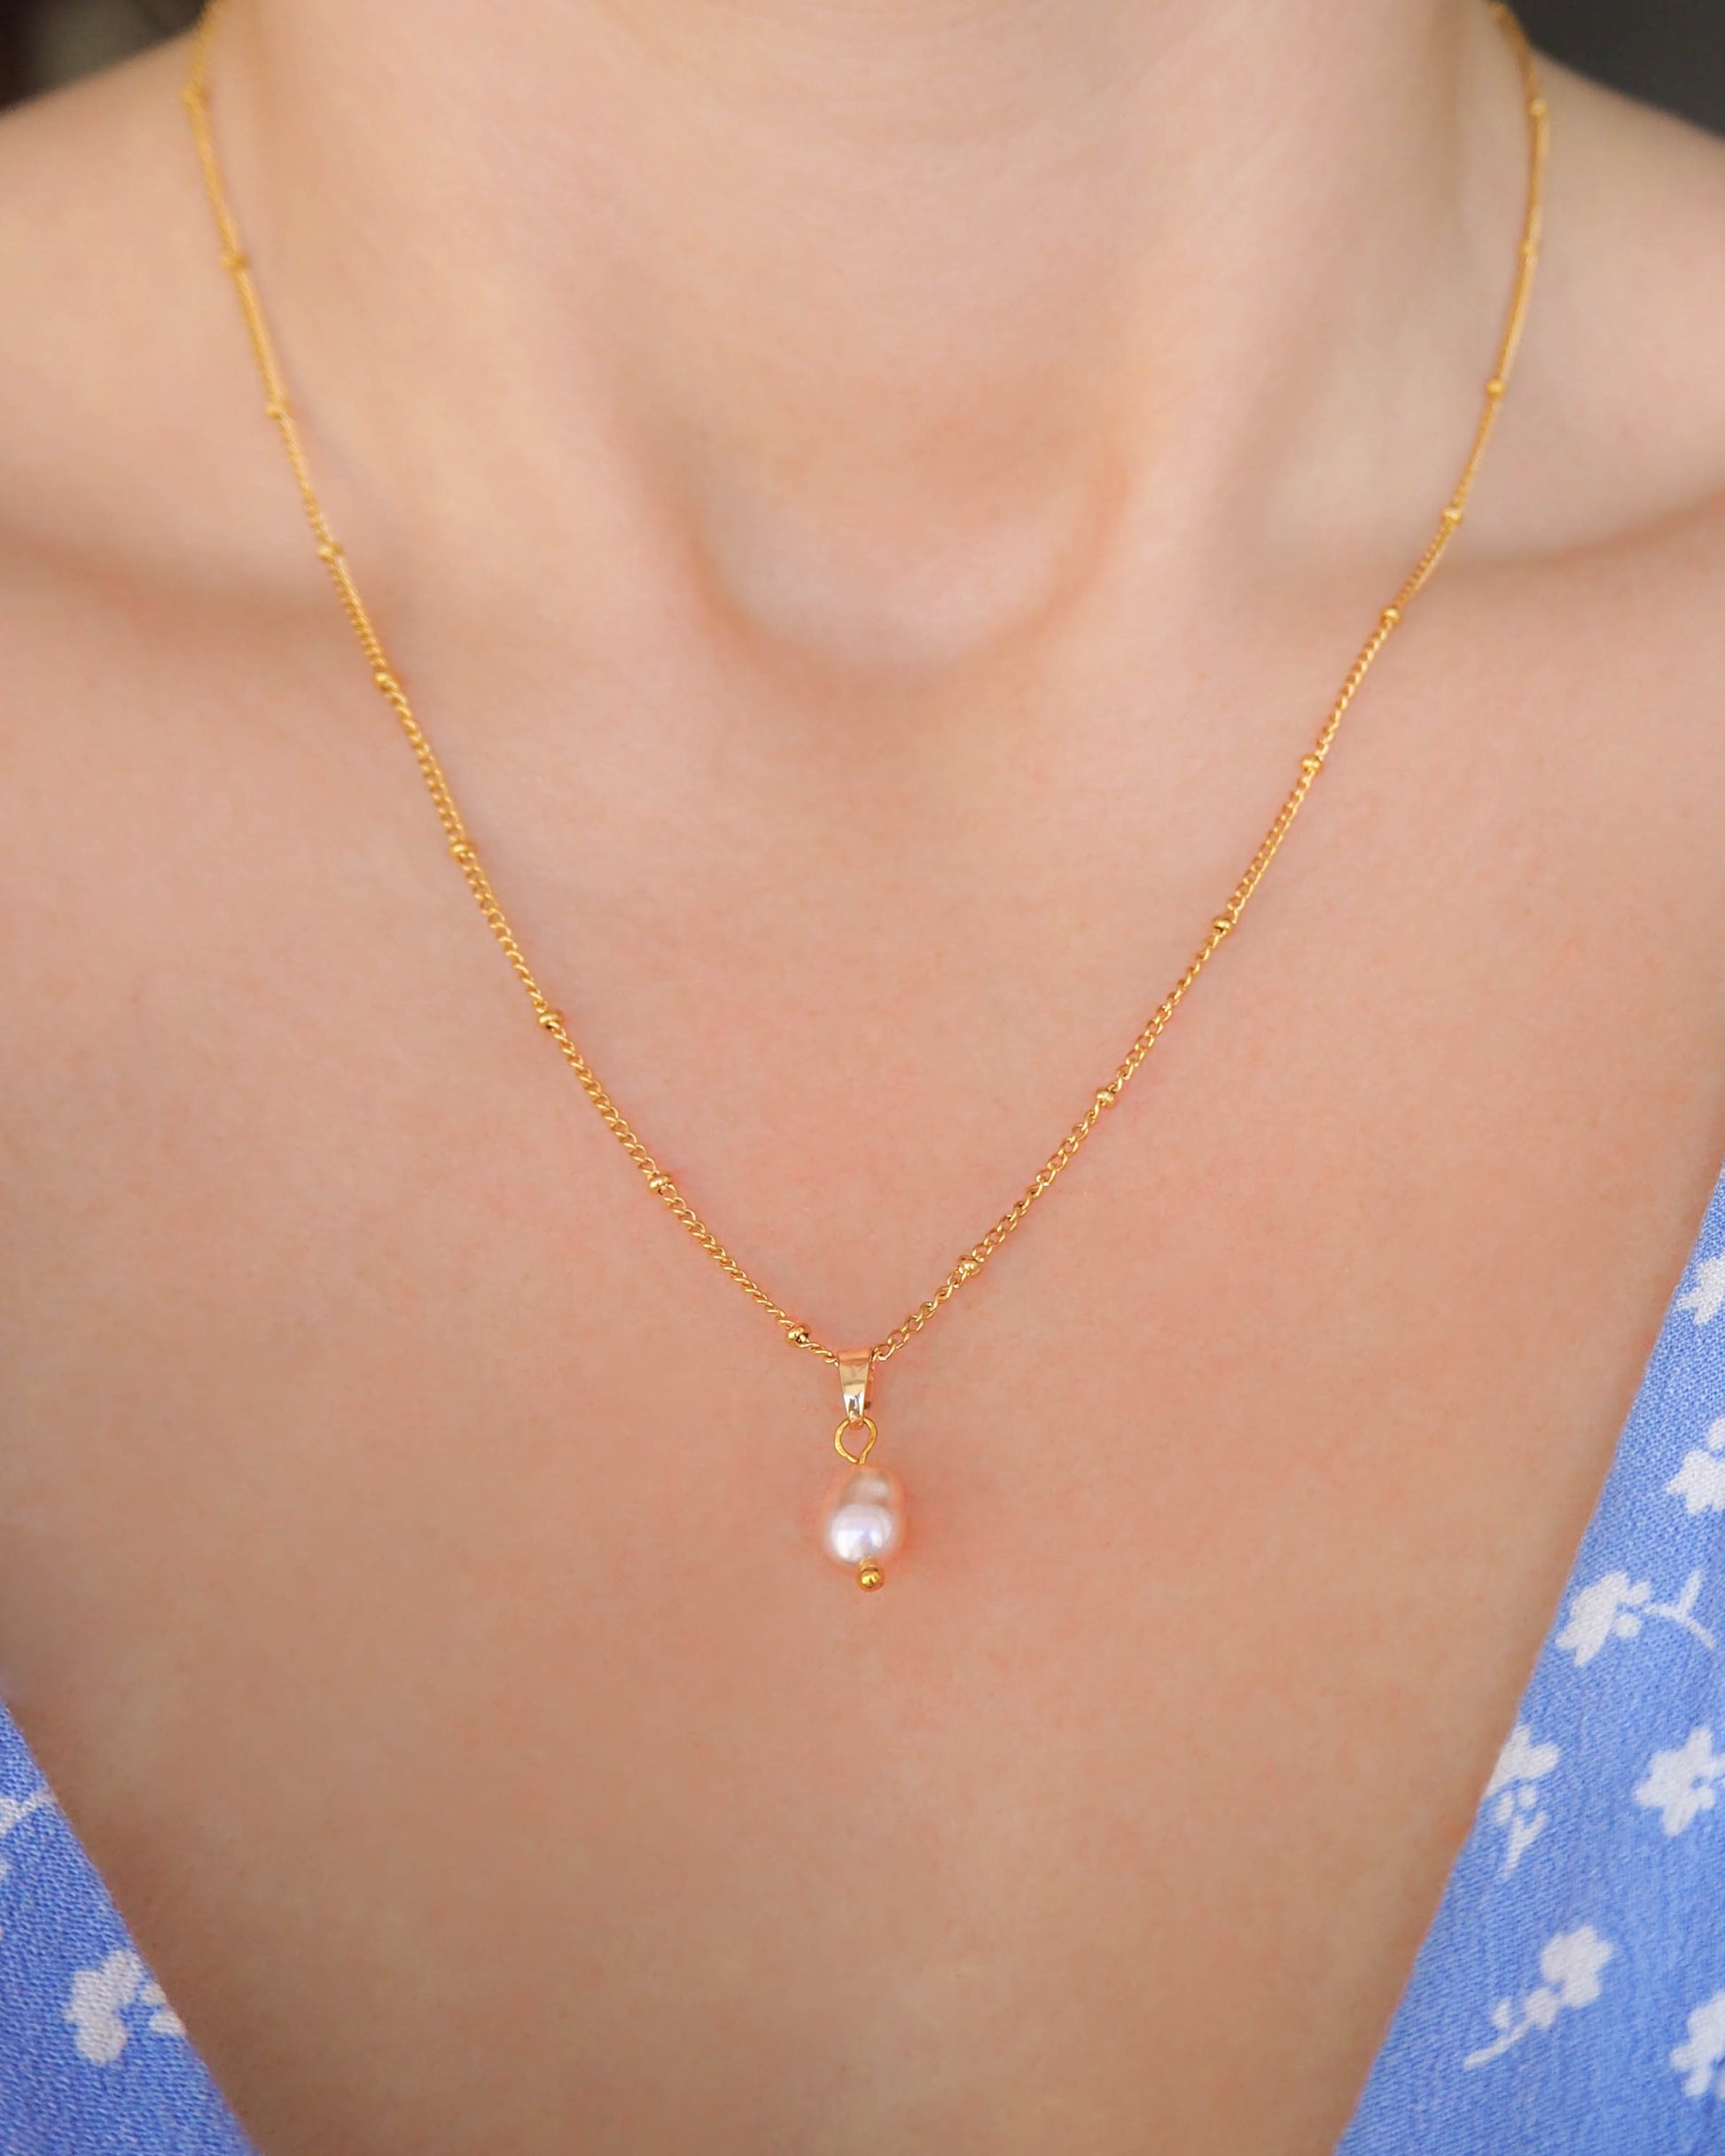 Model wearing Gold Stainless Steel Bead Chain Necklace with Freshwater Pearl Pendant - Timeless Elegance, Sea by Lou